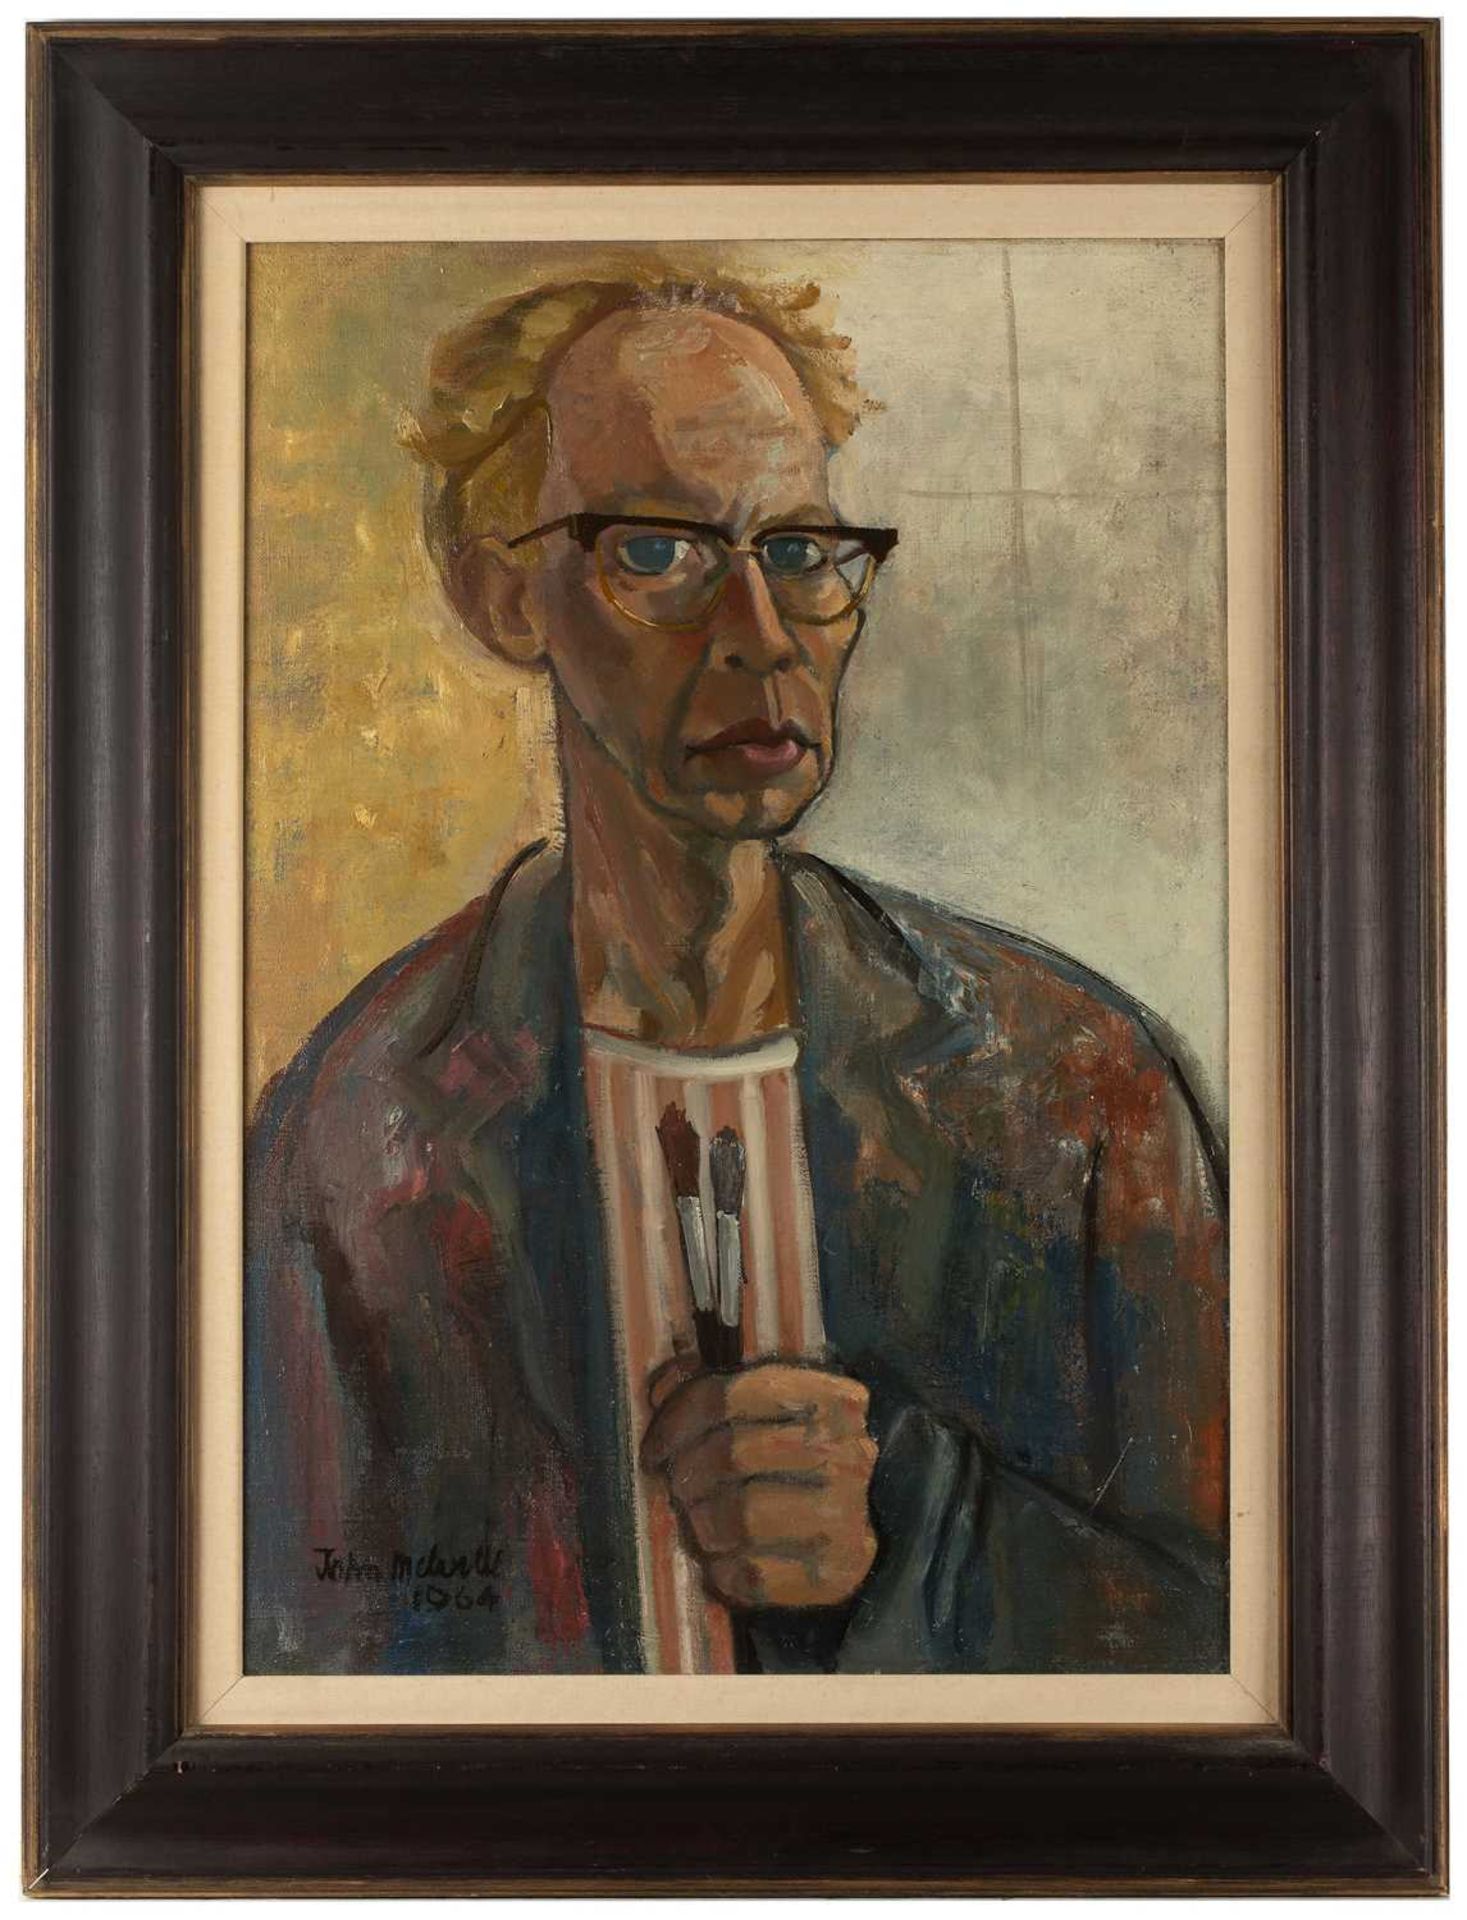 John Melville (1902-1986) Self Portrait, 1964 signed and dated (lower right) oil on canvas 54x 80cm. - Image 2 of 8